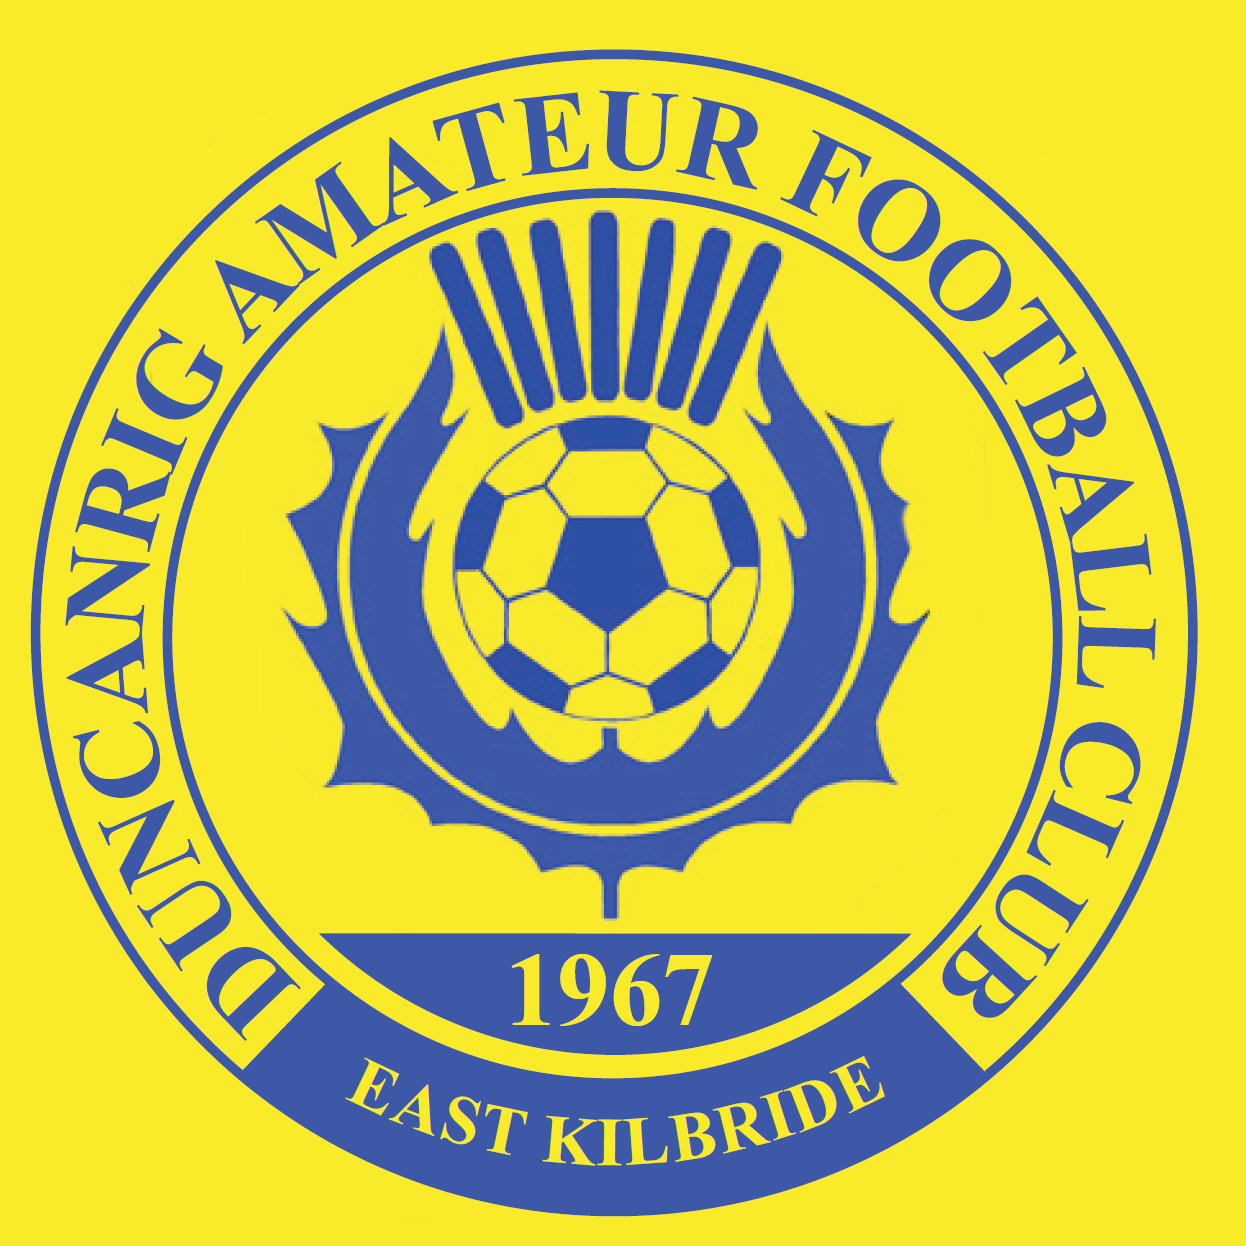 Established in 1967, we are an amateur team playing in the @GGPAFL Home Park: K Park, East Kilbride.